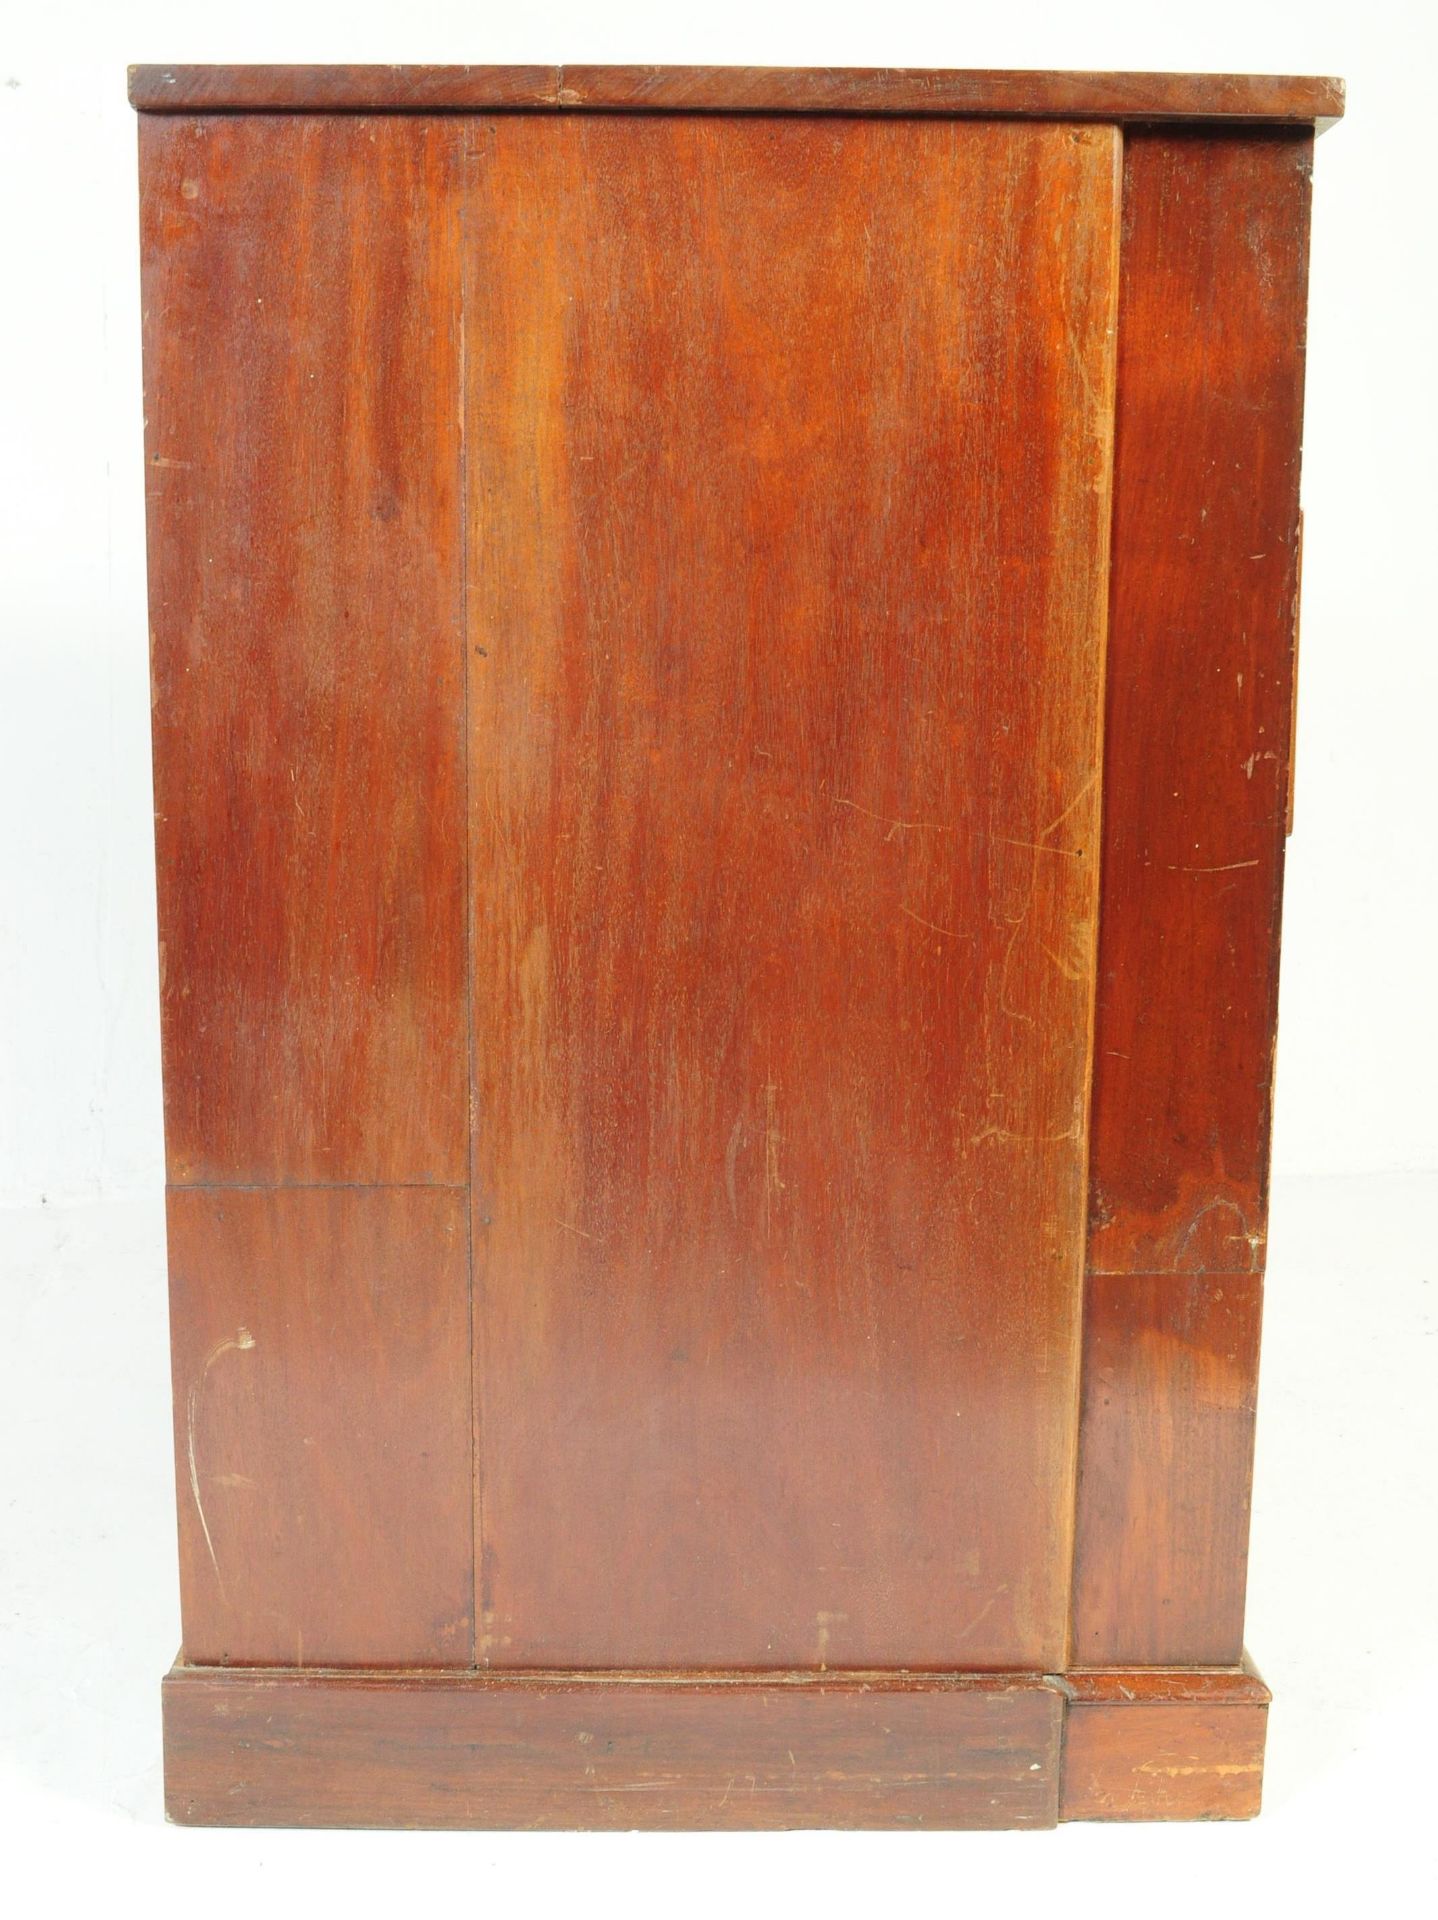 EDWARDIAN EARLY 20TH CENTURY MAHOGANY CHEST OF DRAWERS - Image 6 of 6